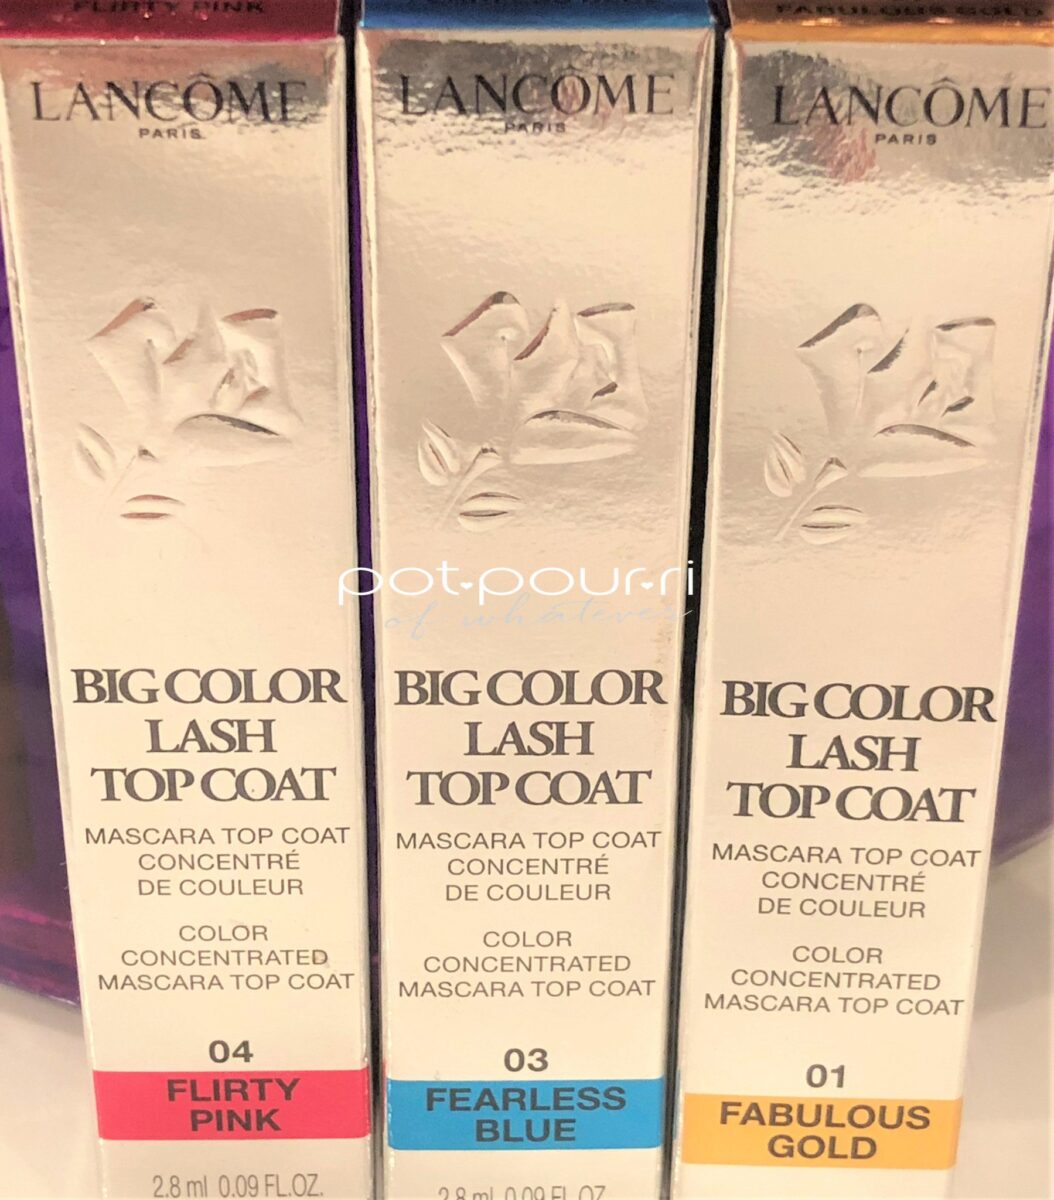 TRENDING NOW COLORED MASCARA LANCOME TOP COAT PACKAGING